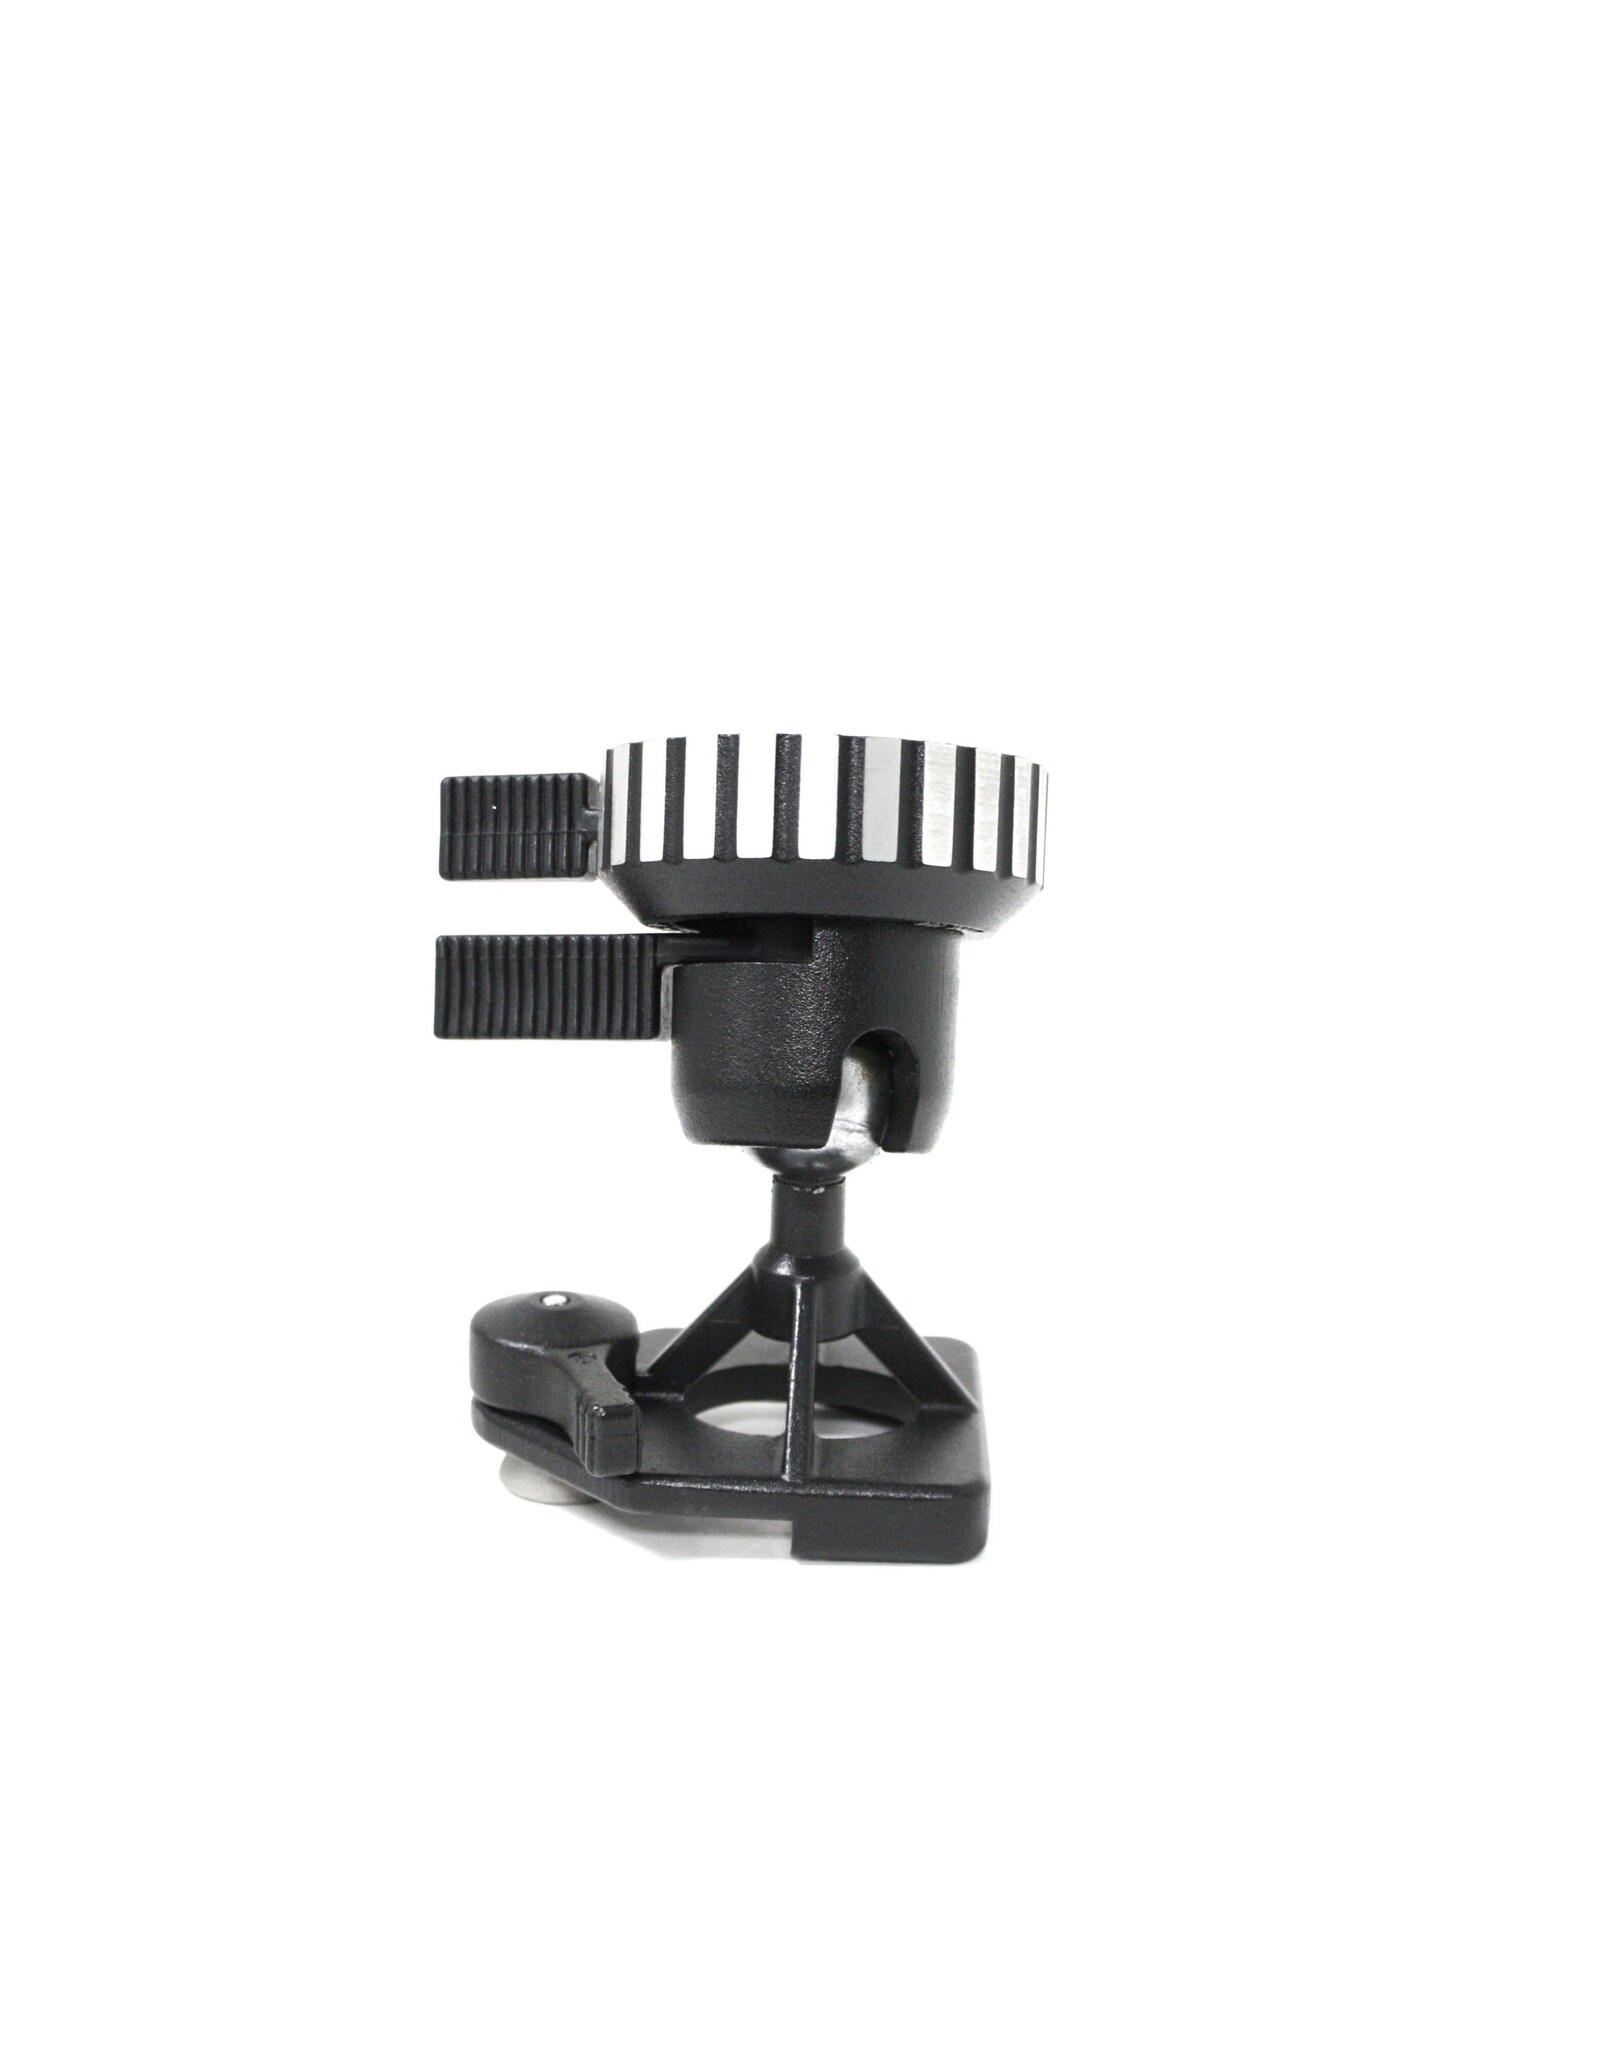 Bogen Bogen Manfrotto 3055 Tripod Ball Head with Quick Release Plate (Pre-Owned)